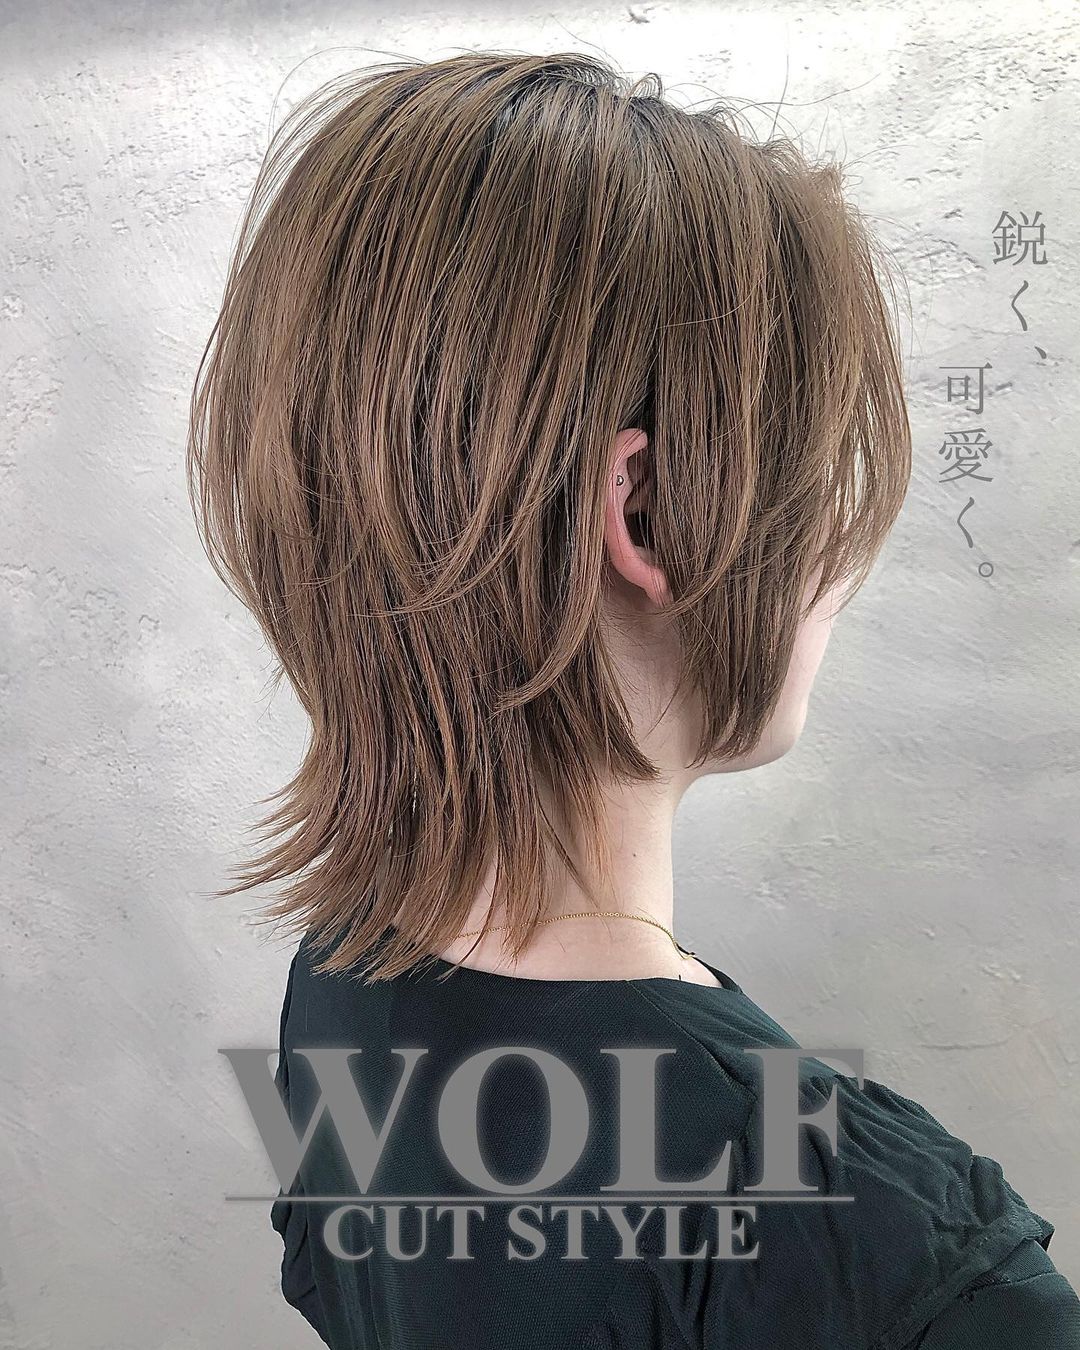 TIKTOK WOLF CUT TUTORIAL  SHAG HAIRCUT MULLET HAIRCUT  MASHED TOGETHER TO  CREATE THE WOLF HAIRCUT  YouTube